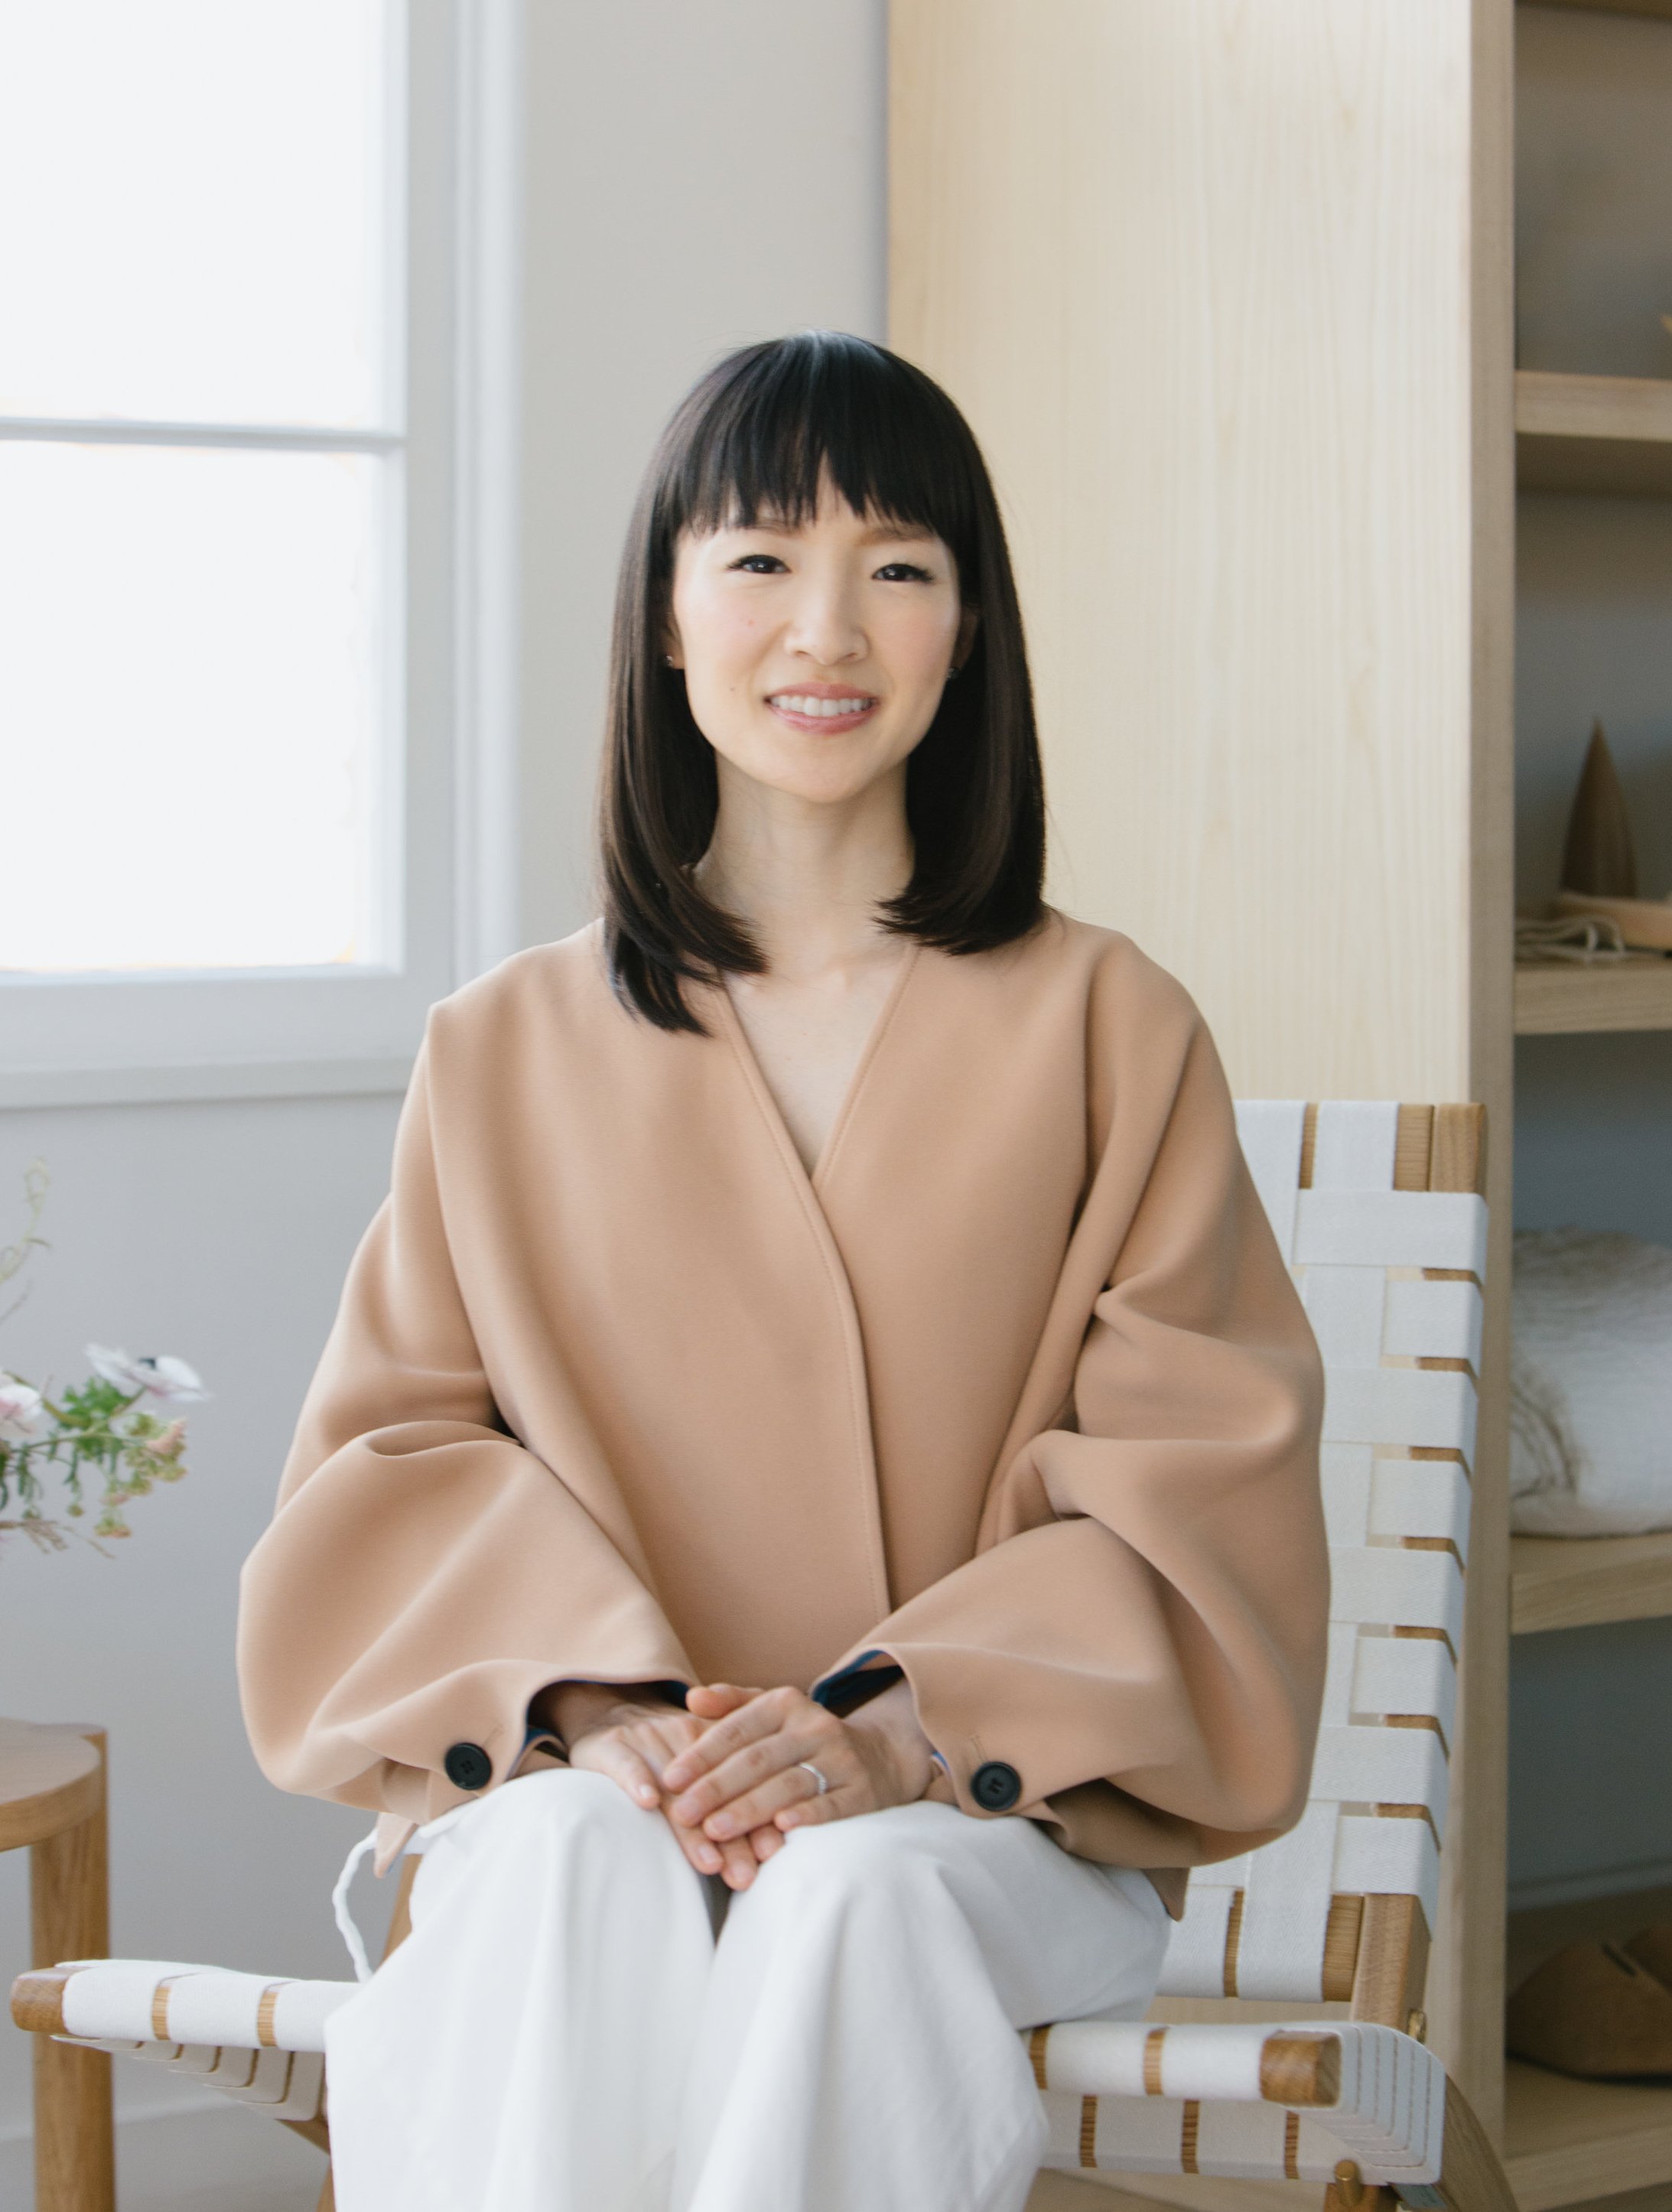 Why declutter queen Marie Kondo giving up on tidying is a good thing